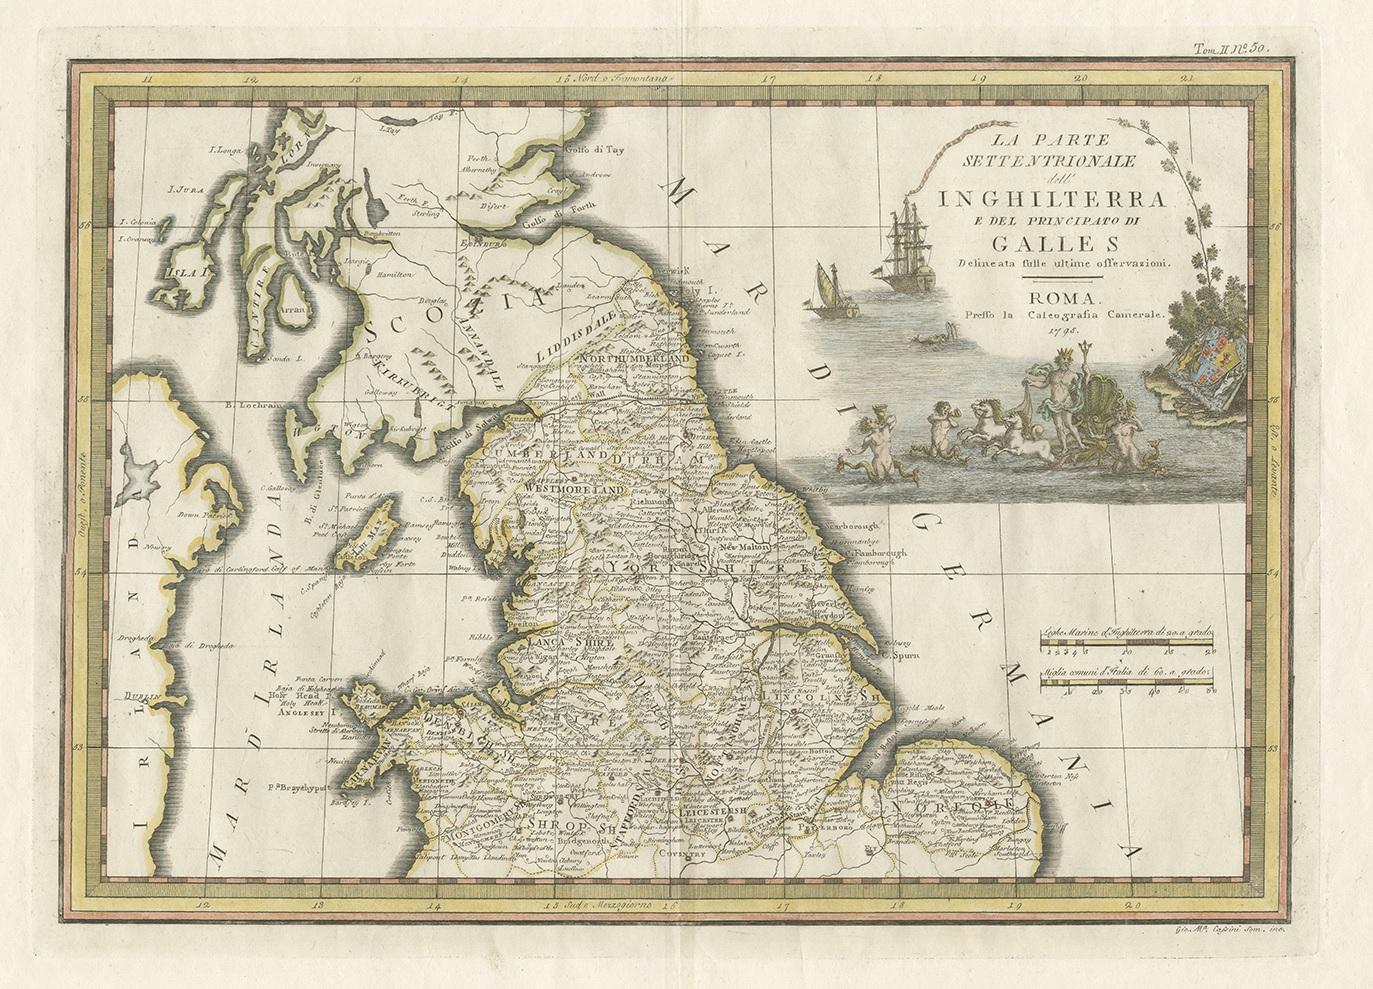 Antique map titled 'La Parte Settentrionale dell' Inghilterra e del Principato di Galles'. 

Engraved map of Northern England and Wales. Shows Northumberland, Westmoreland, Cumberland, Durham, Yorkshire, Lancashire, Lincolnshire, Cheshire,